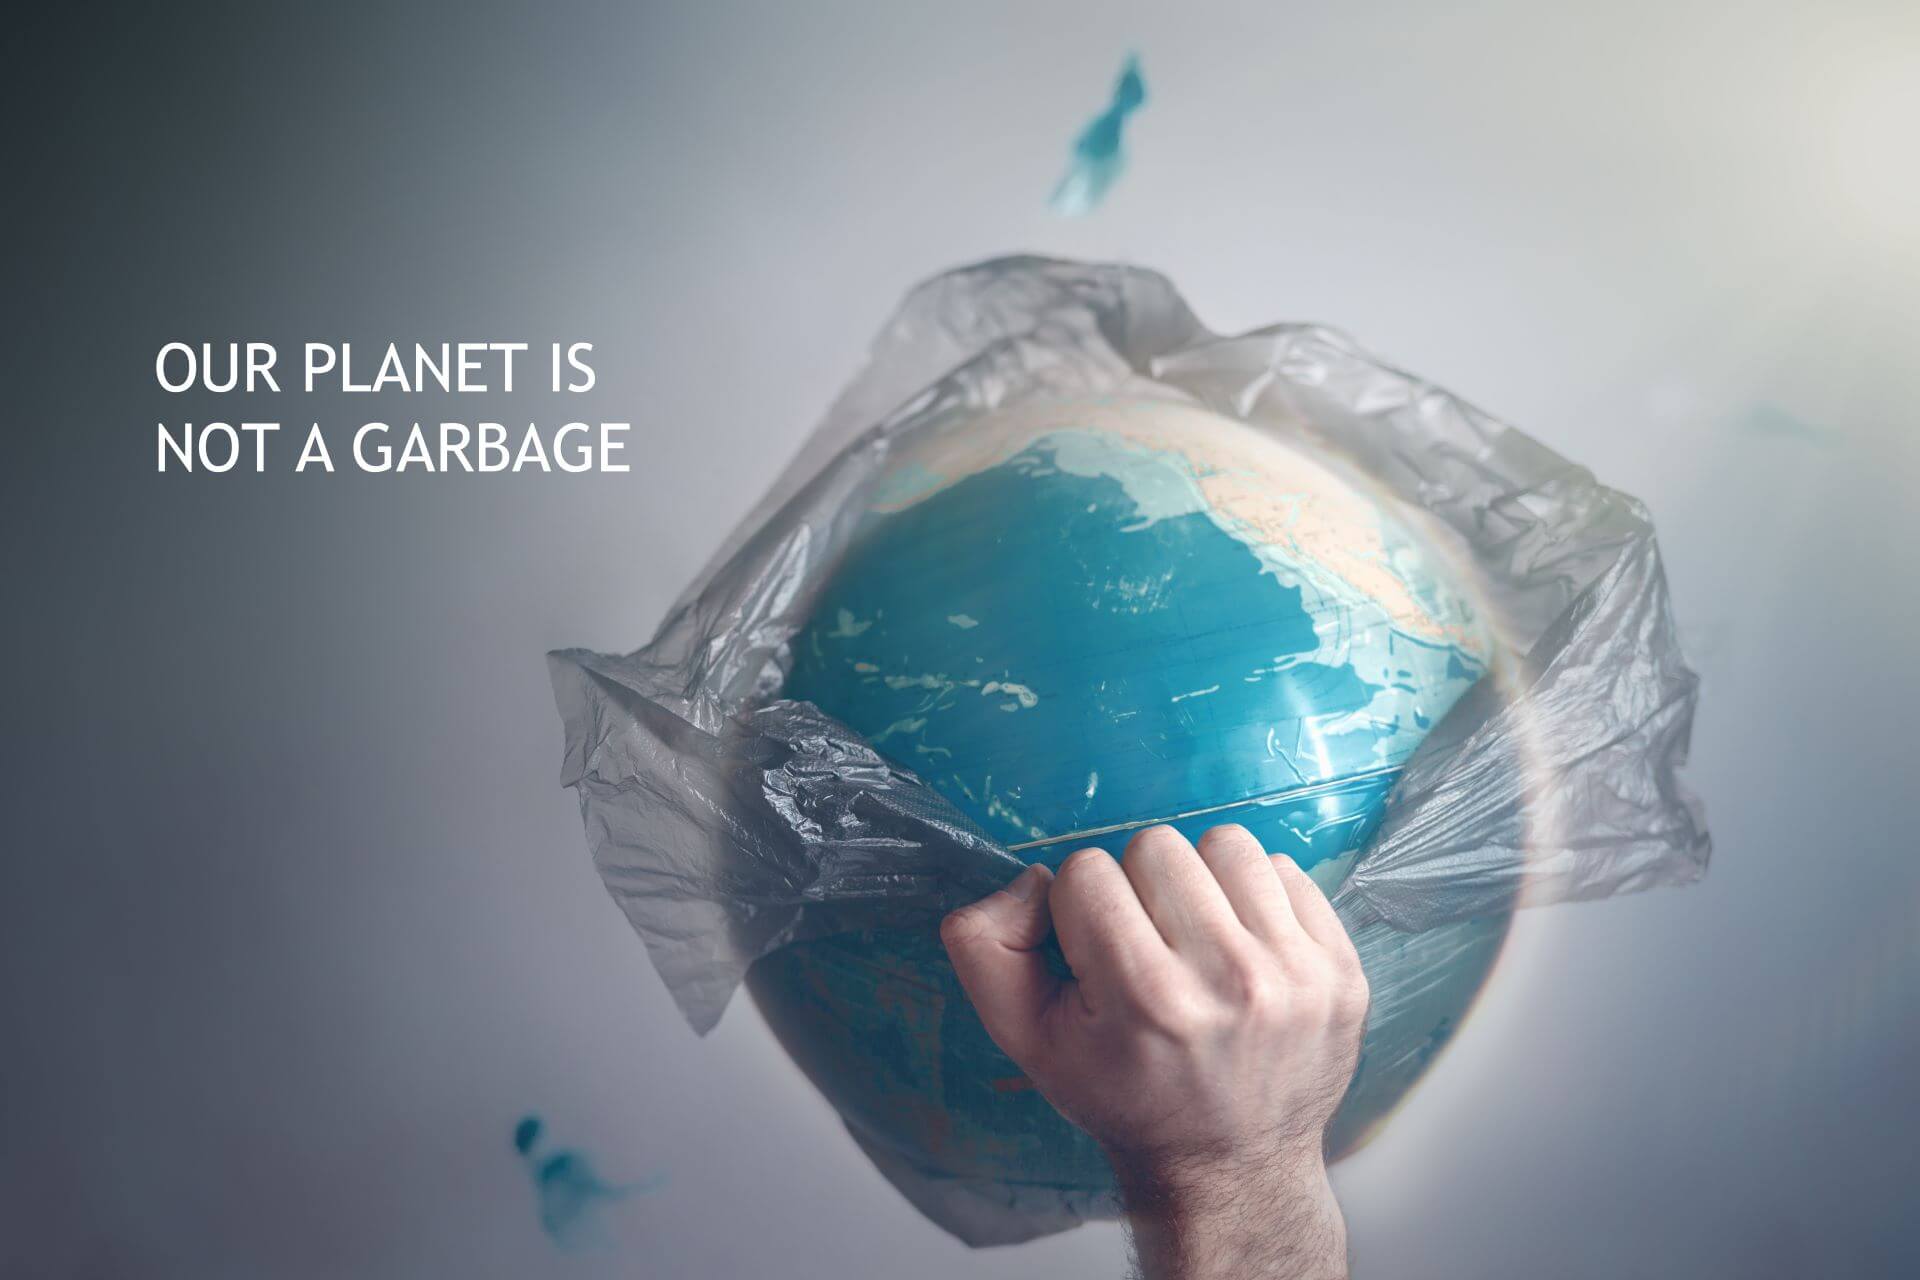 Our planet is not garbage